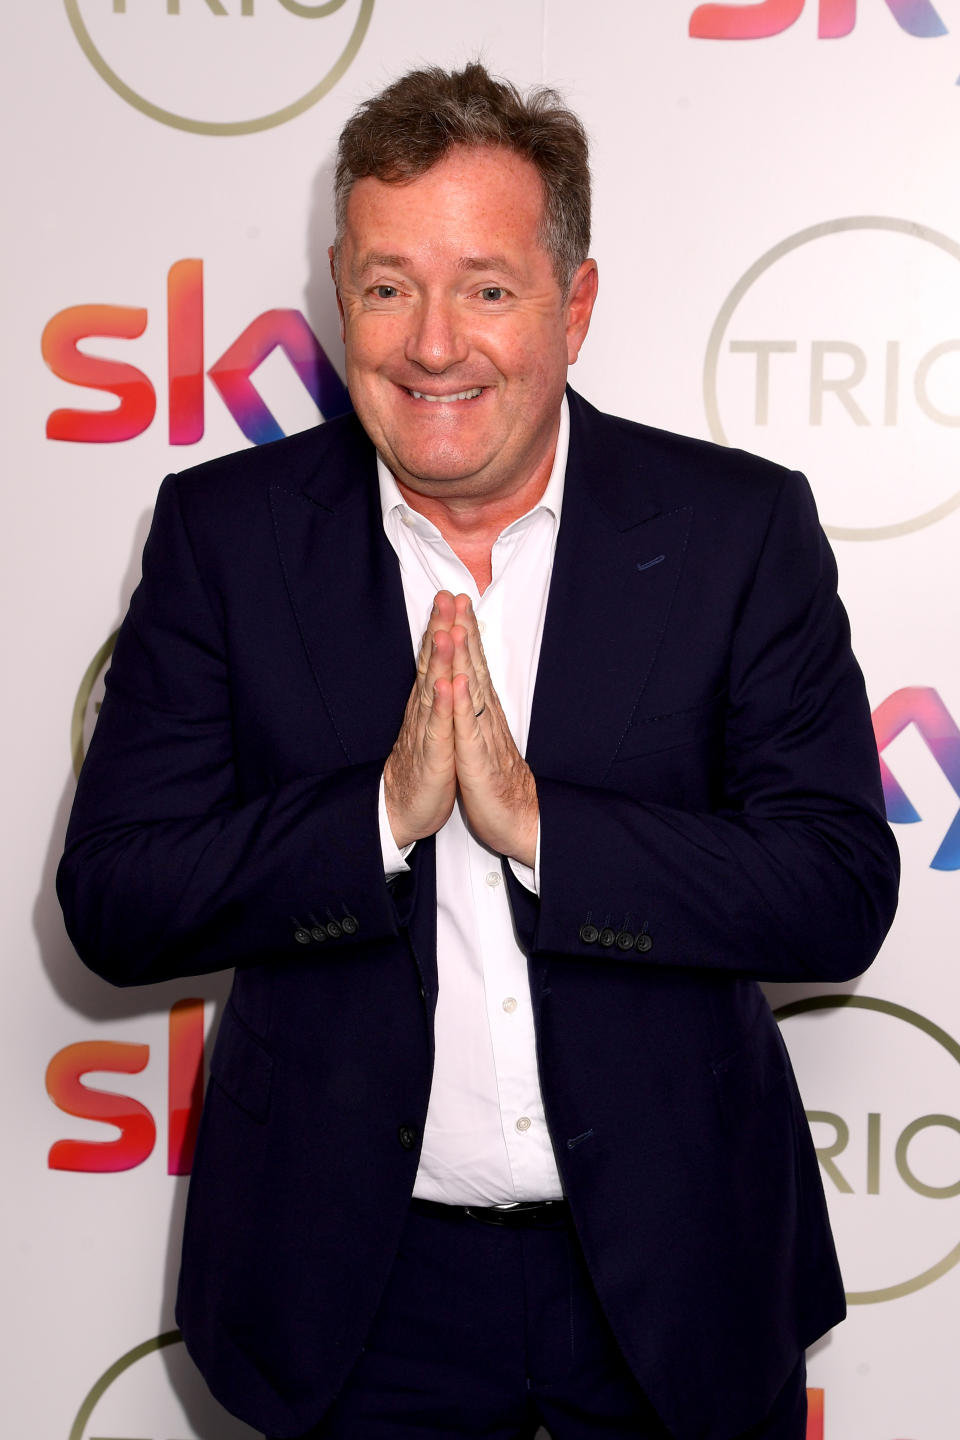 LONDON, ENGLAND - MARCH 10: Piers Morgan attends the TRIC Awards 2020 at The Grosvenor House Hotel on March 10, 2020 in London, England. (Photo by Dave J Hogan/Getty Images)